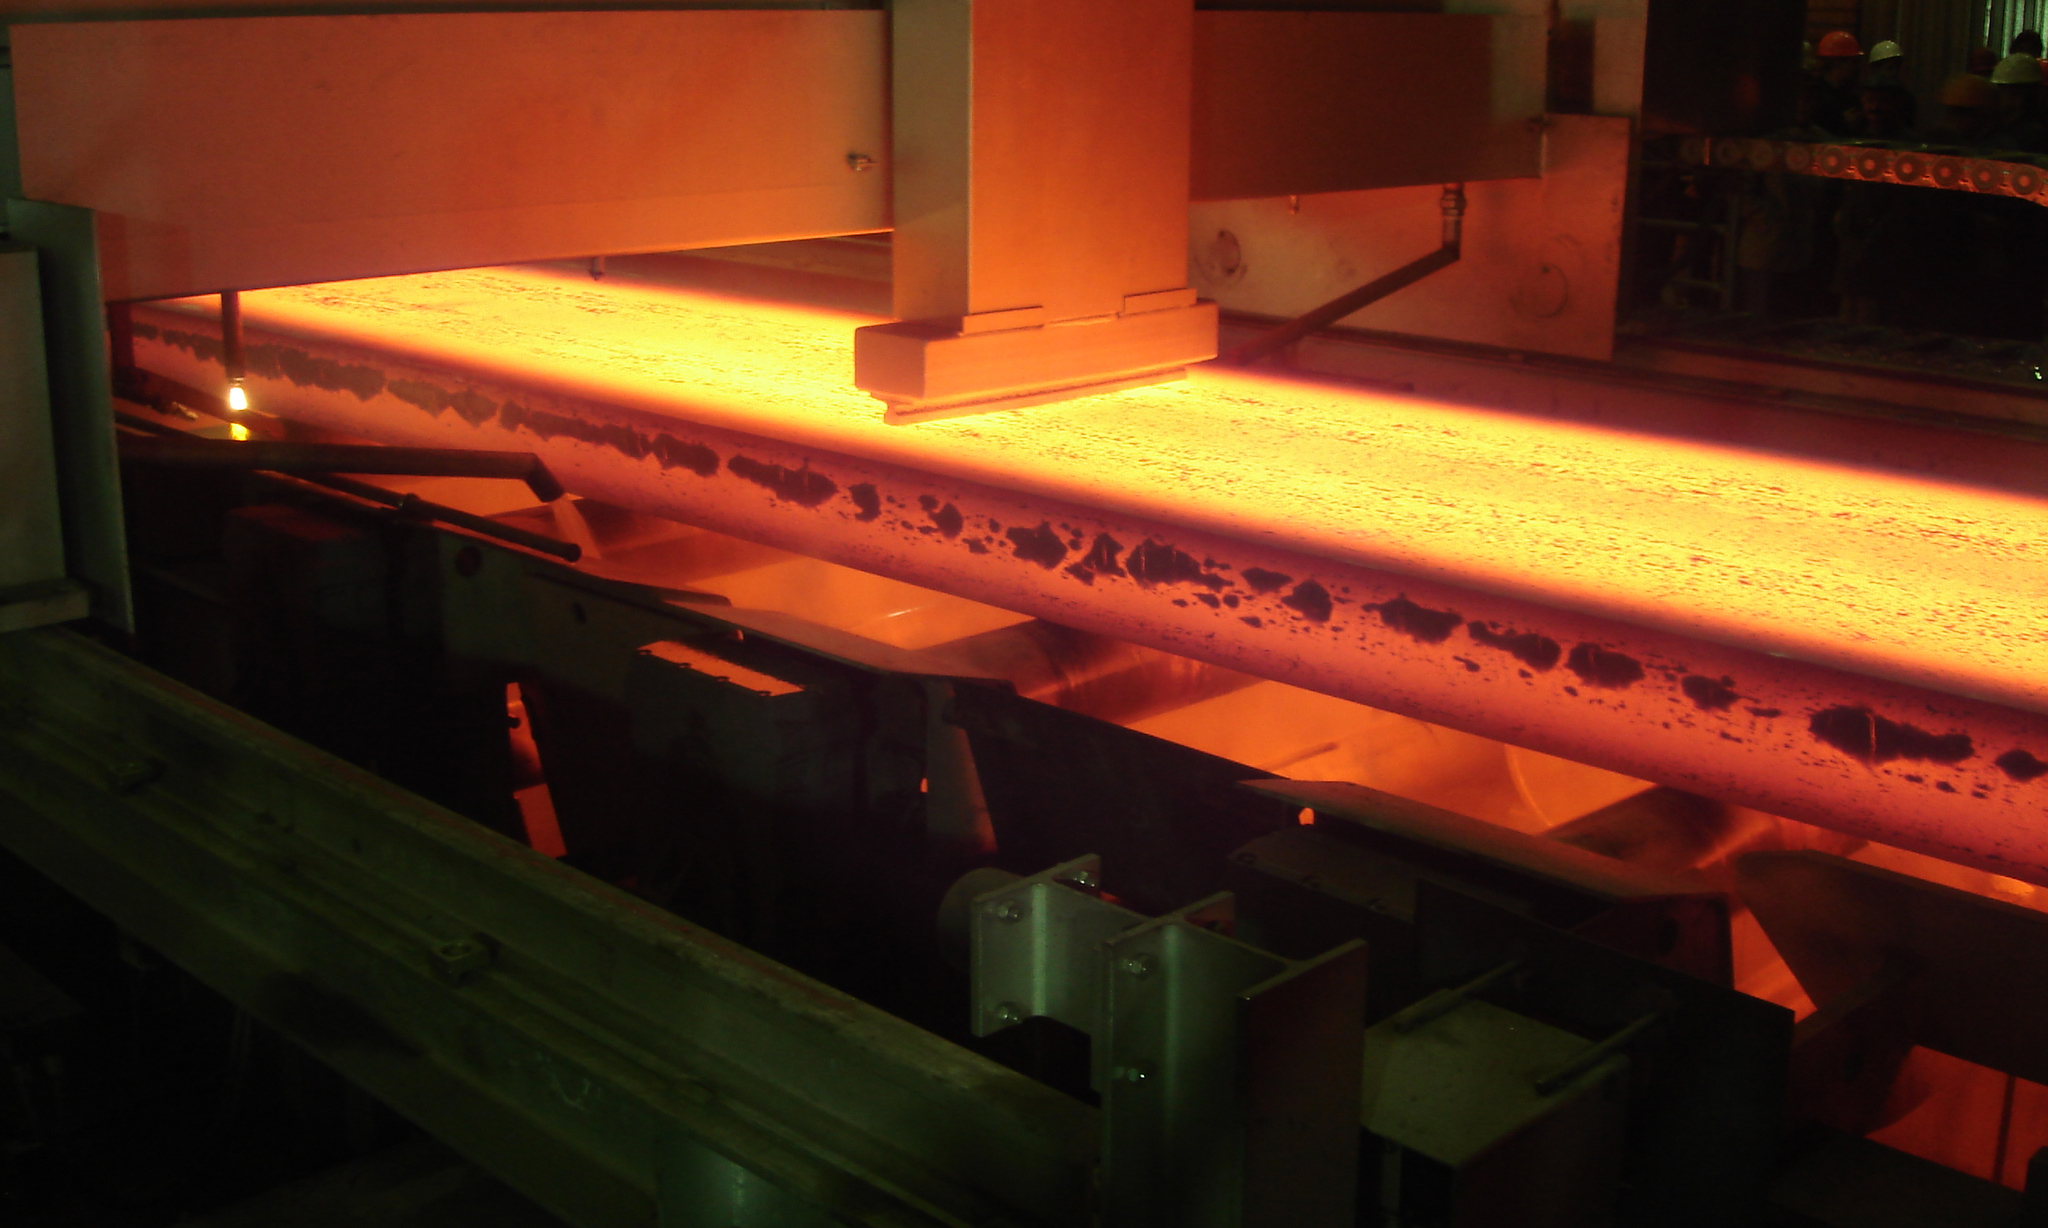 Adding value by reducing quality defects in continuous cast steel semis